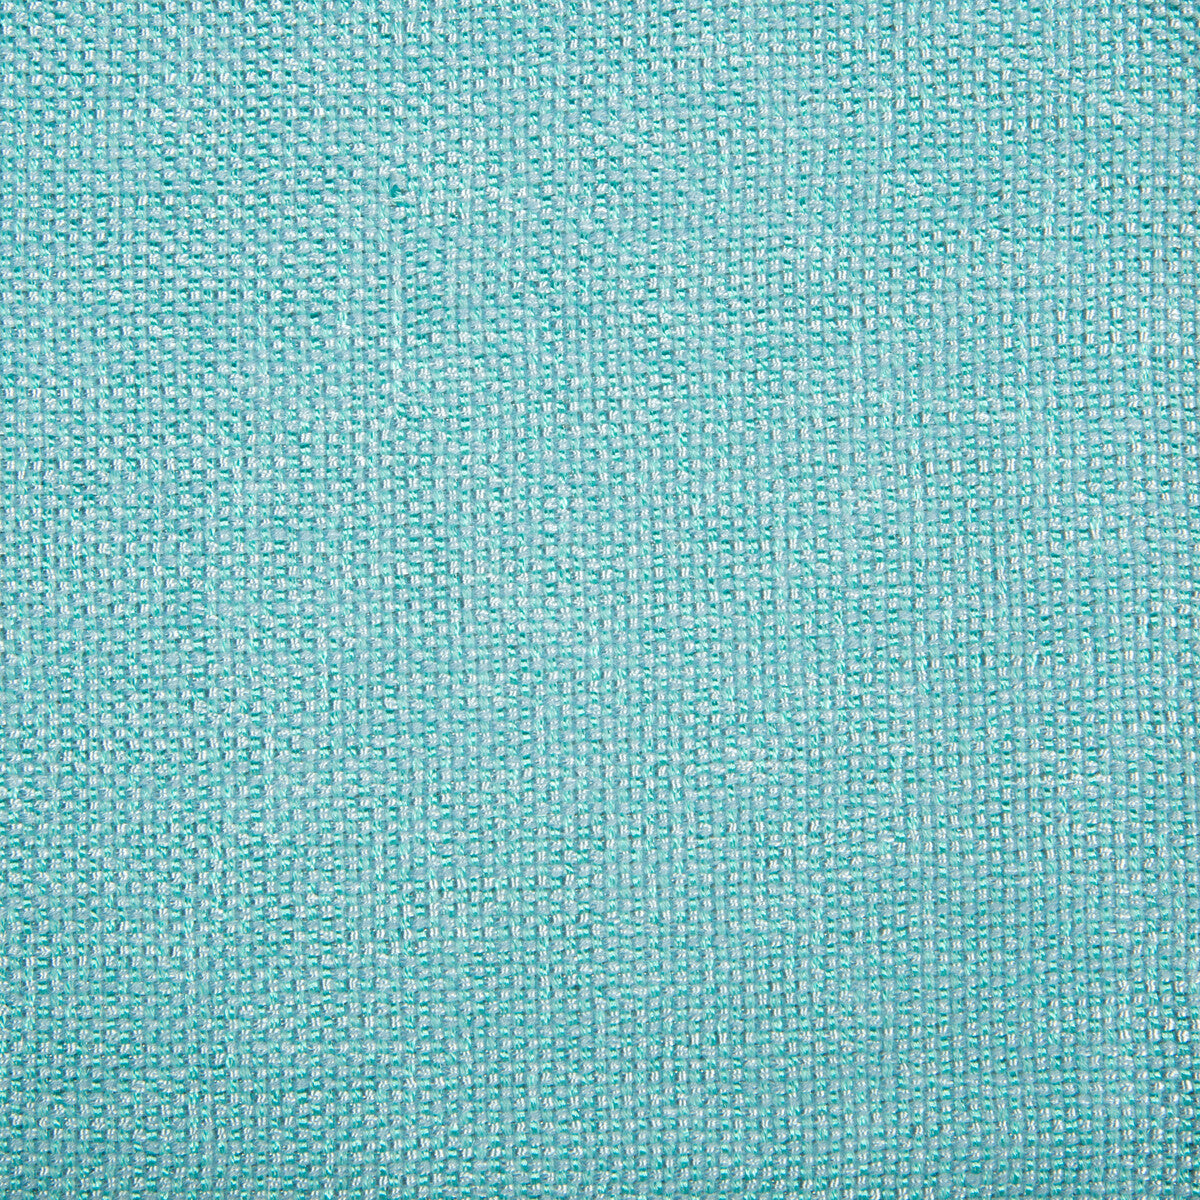 Kravet Contract fabric in 34926-115 color - pattern 34926.115.0 - by Kravet Contract